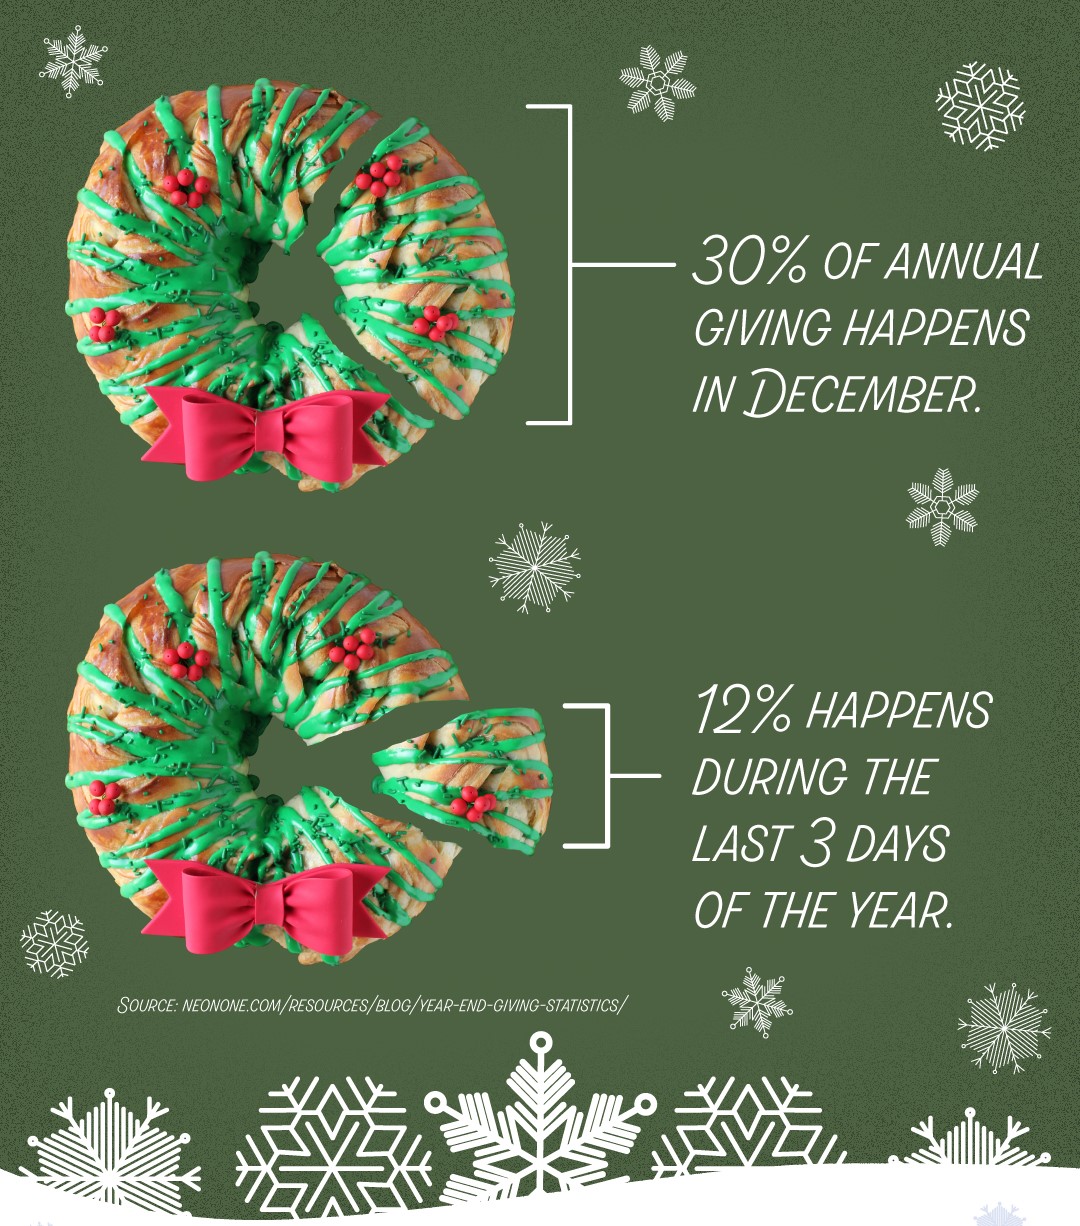 Infographic section 1 - percentage of annual giving in December